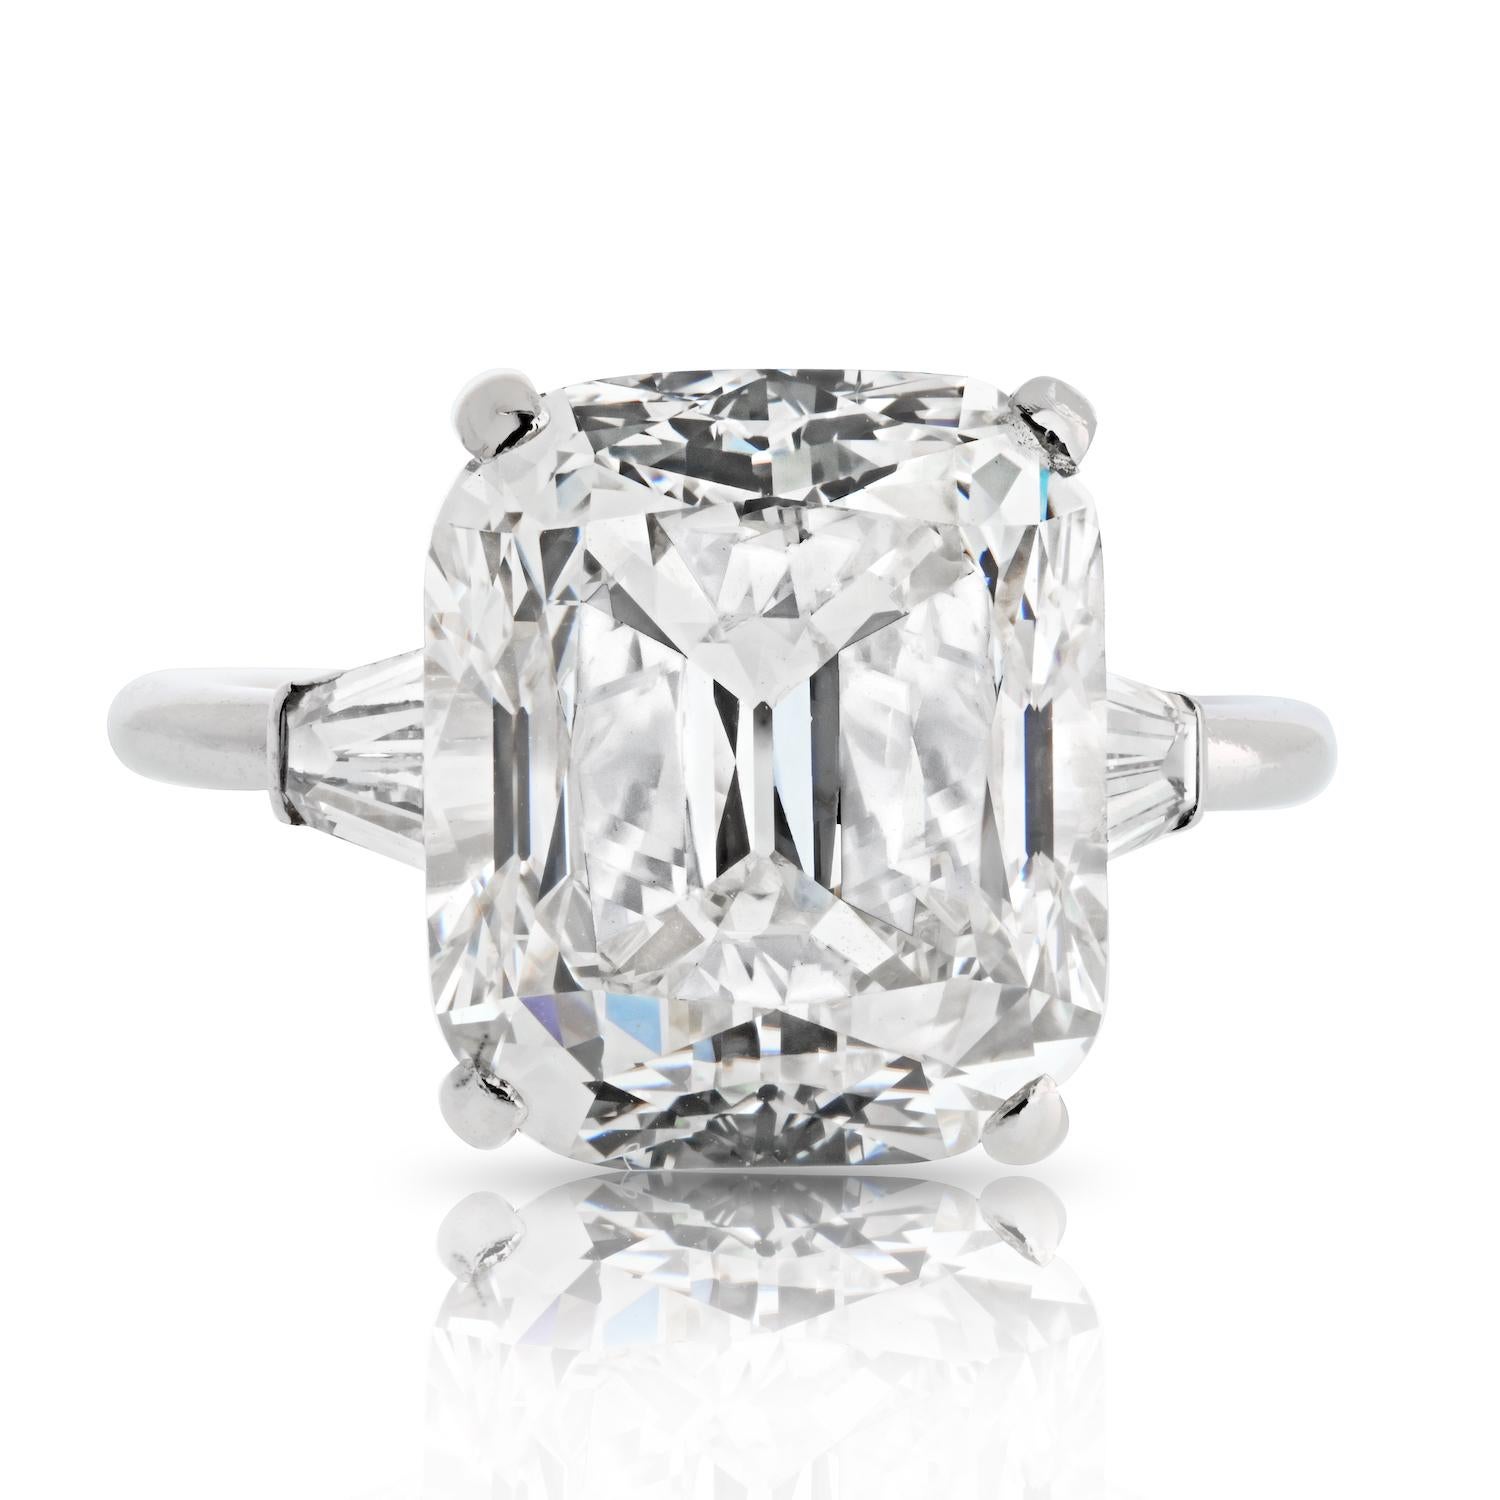 Indulge in the timeless allure of this extraordinary engagement ring, featuring a spectacular 8.17-carat cushion old mine cut diamond certified by GIA. 

Graced with L color, the diamond exhibits a unique warmth that is common for old-mine cut